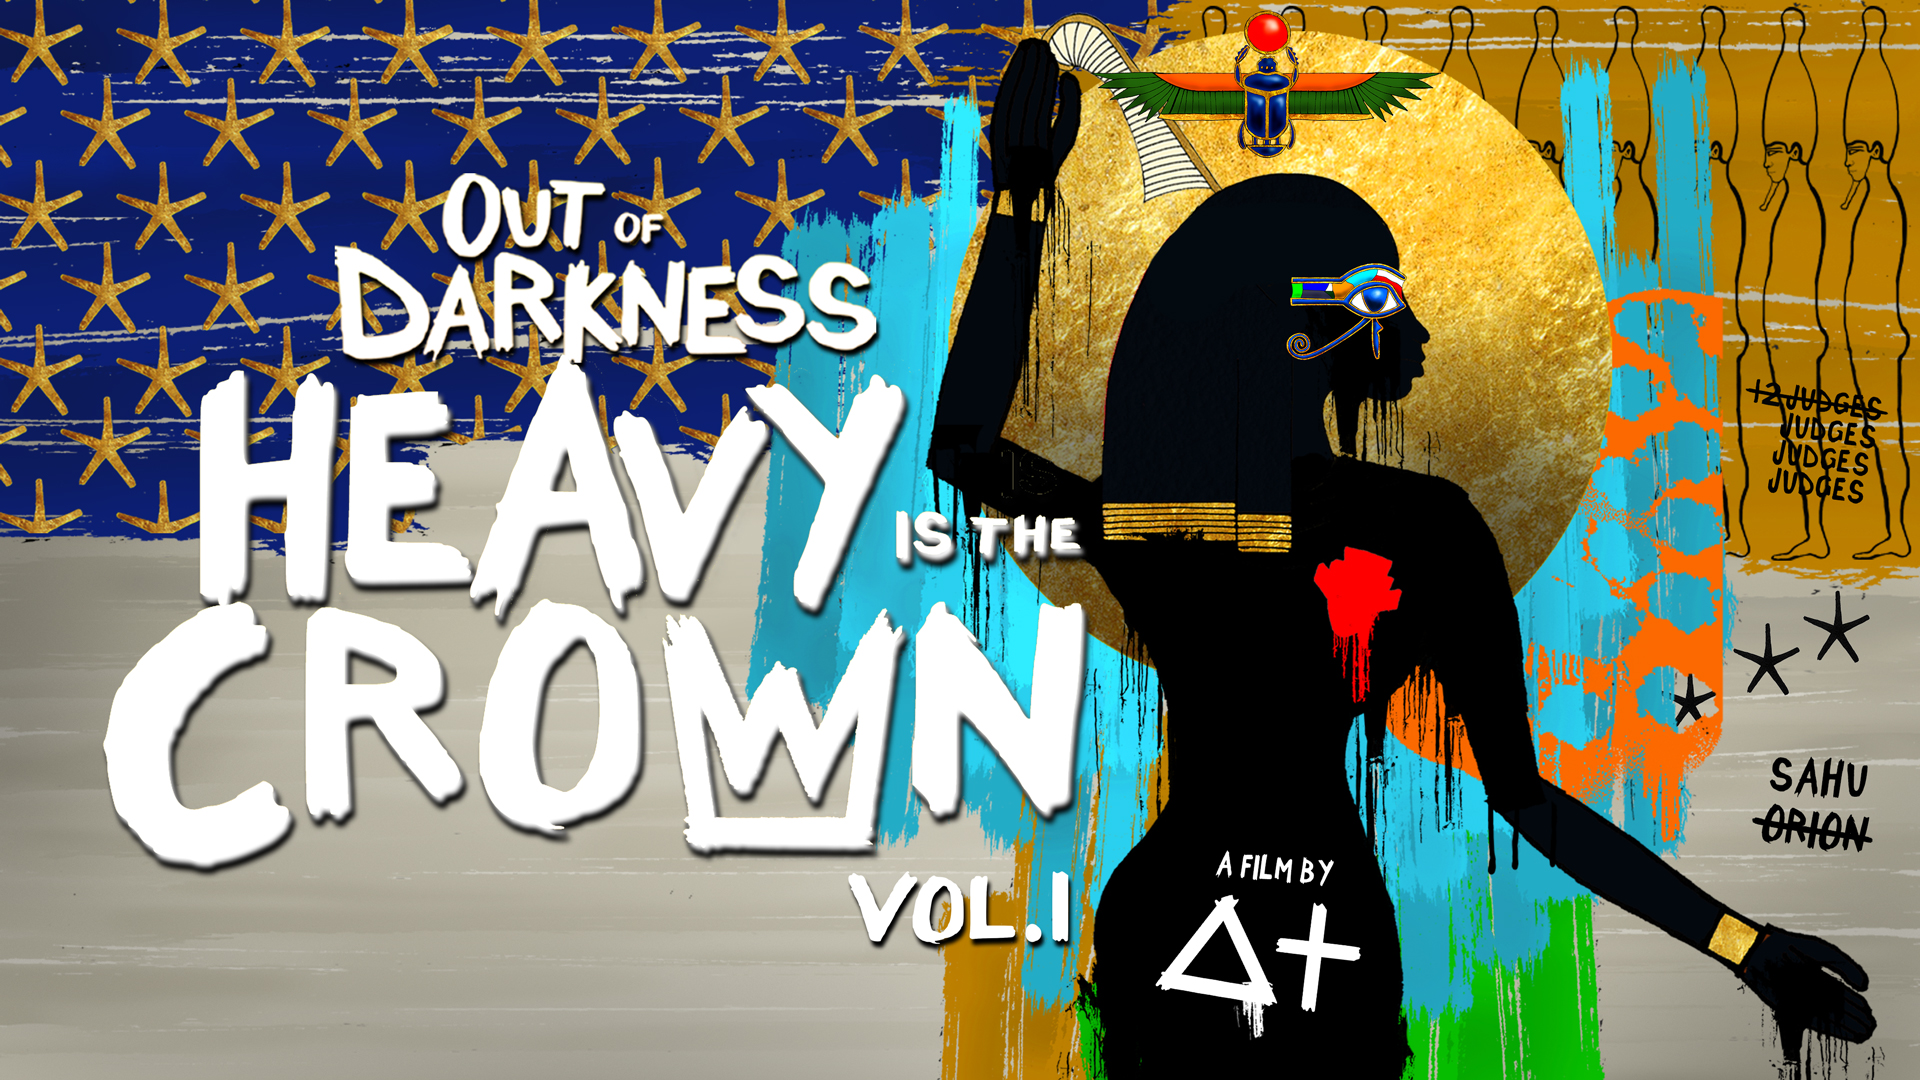 You are currently viewing BHM Screening of ‘Out of Darkness: Heavy is the Crown Vol. 1’